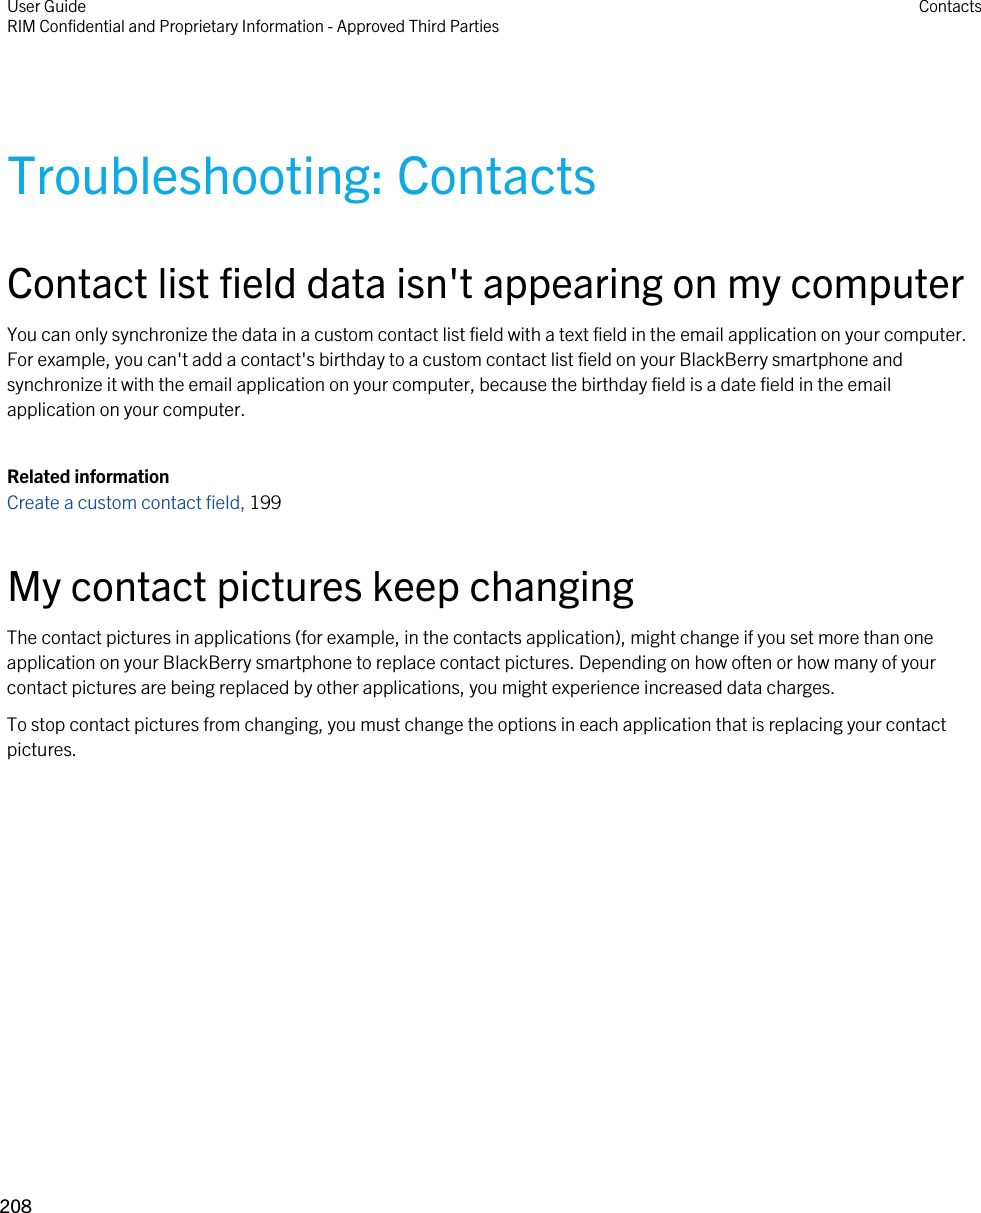 Troubleshooting: ContactsContact list field data isn&apos;t appearing on my computerYou can only synchronize the data in a custom contact list field with a text field in the email application on your computer. For example, you can&apos;t add a contact&apos;s birthday to a custom contact list field on your BlackBerry smartphone and synchronize it with the email application on your computer, because the birthday field is a date field in the email application on your computer.Related informationCreate a custom contact field, 199 My contact pictures keep changingThe contact pictures in applications (for example, in the contacts application), might change if you set more than one application on your BlackBerry smartphone to replace contact pictures. Depending on how often or how many of your contact pictures are being replaced by other applications, you might experience increased data charges.To stop contact pictures from changing, you must change the options in each application that is replacing your contact pictures.User GuideRIM Confidential and Proprietary Information - Approved Third Parties Contacts208 